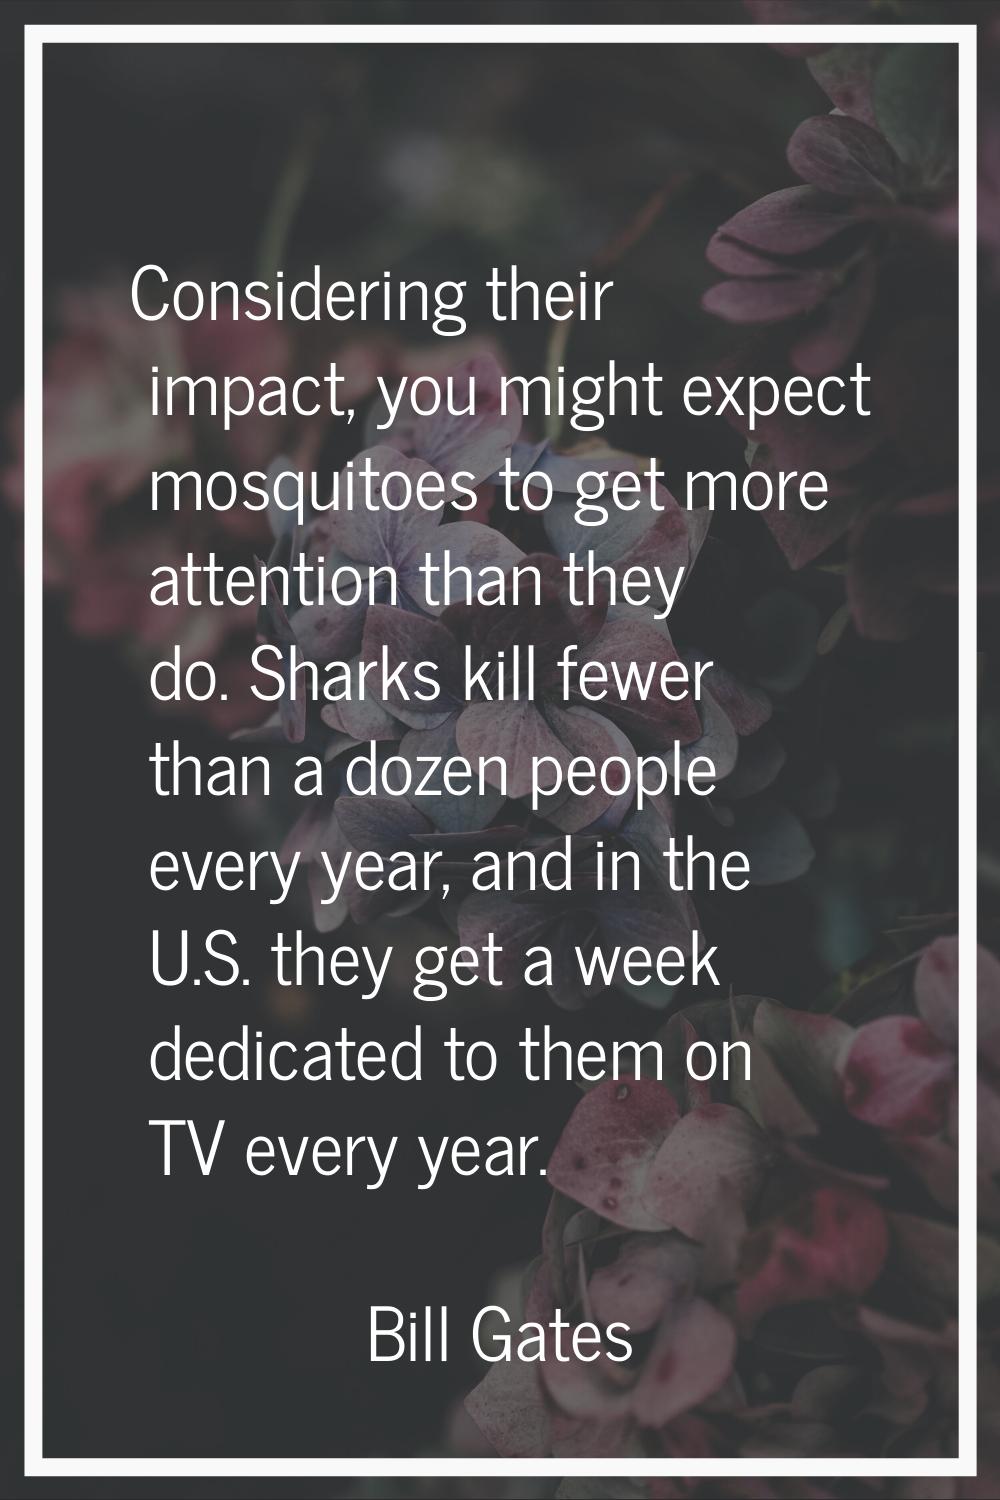 Considering their impact, you might expect mosquitoes to get more attention than they do. Sharks ki